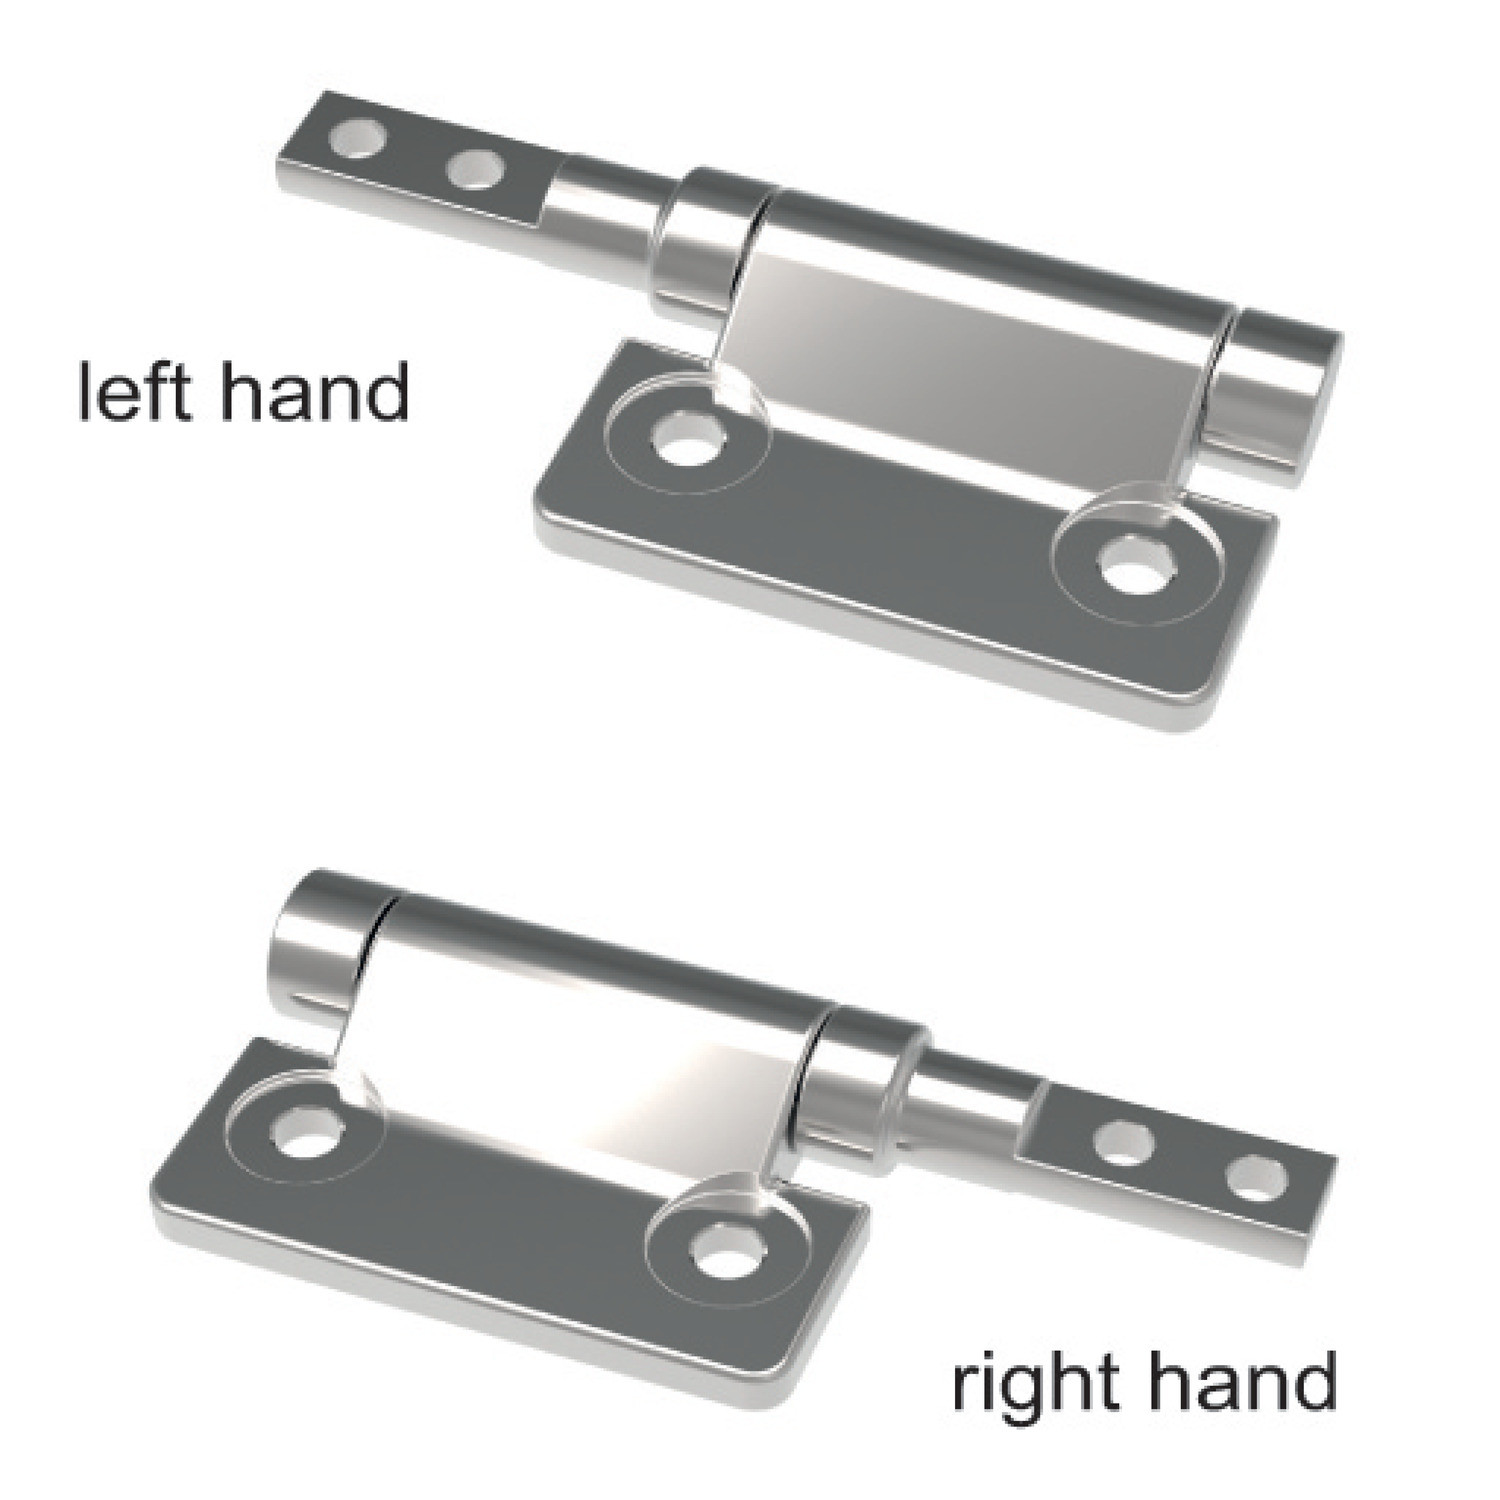 Friction Hinges Asymmetric torque friction hinges. Right and left hand available.0,0 - 4,5 Nm.